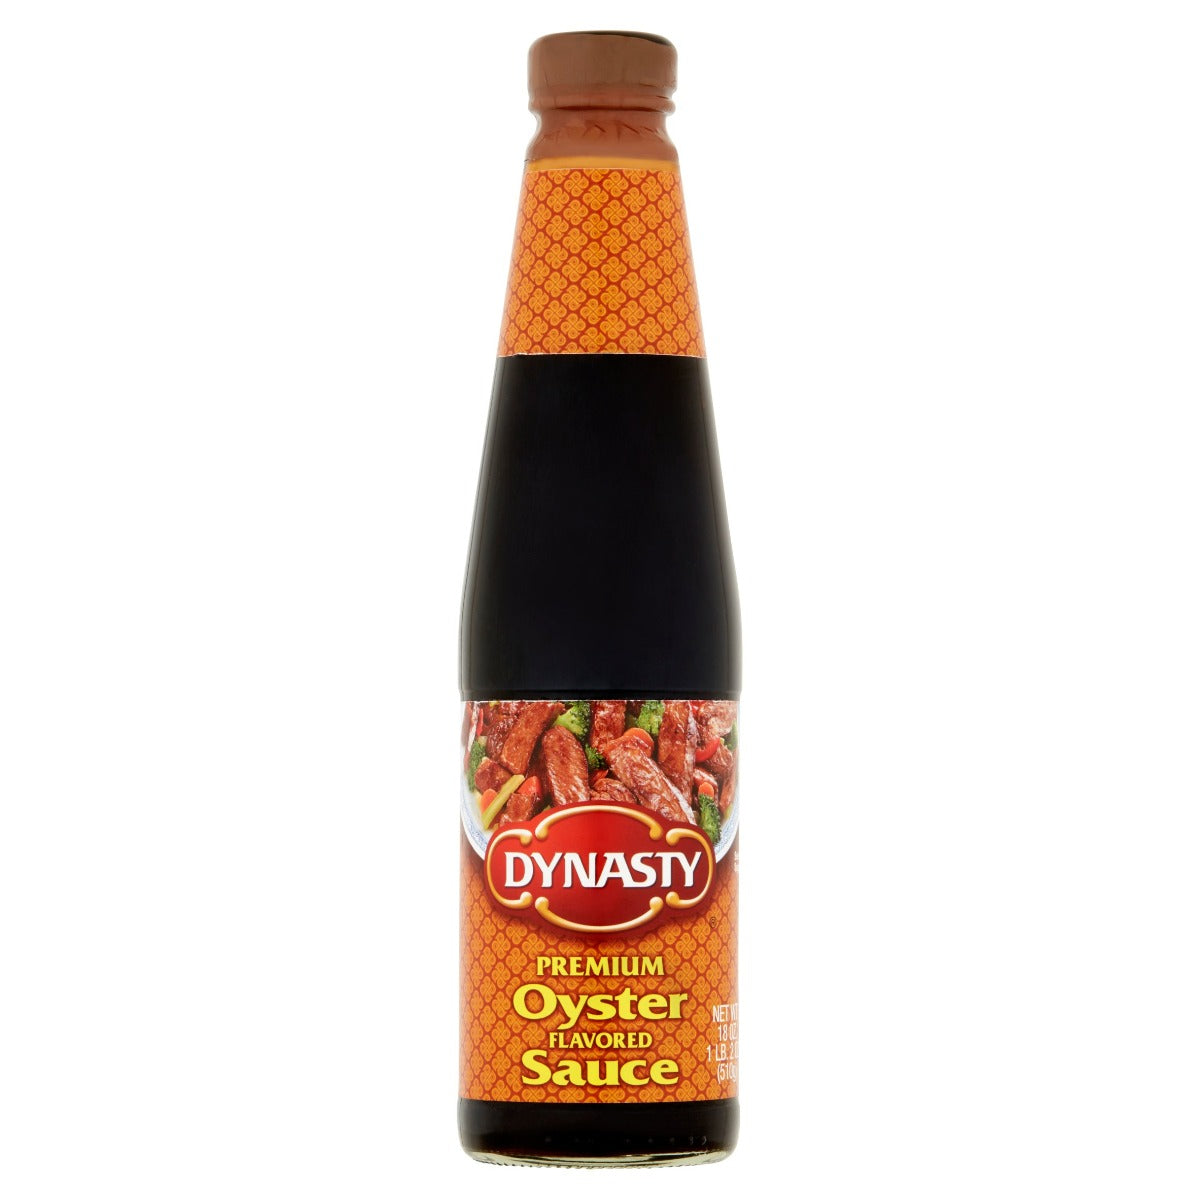 DYNASTY: Oyster Sauce, 18 oz - Vending Business Solutions